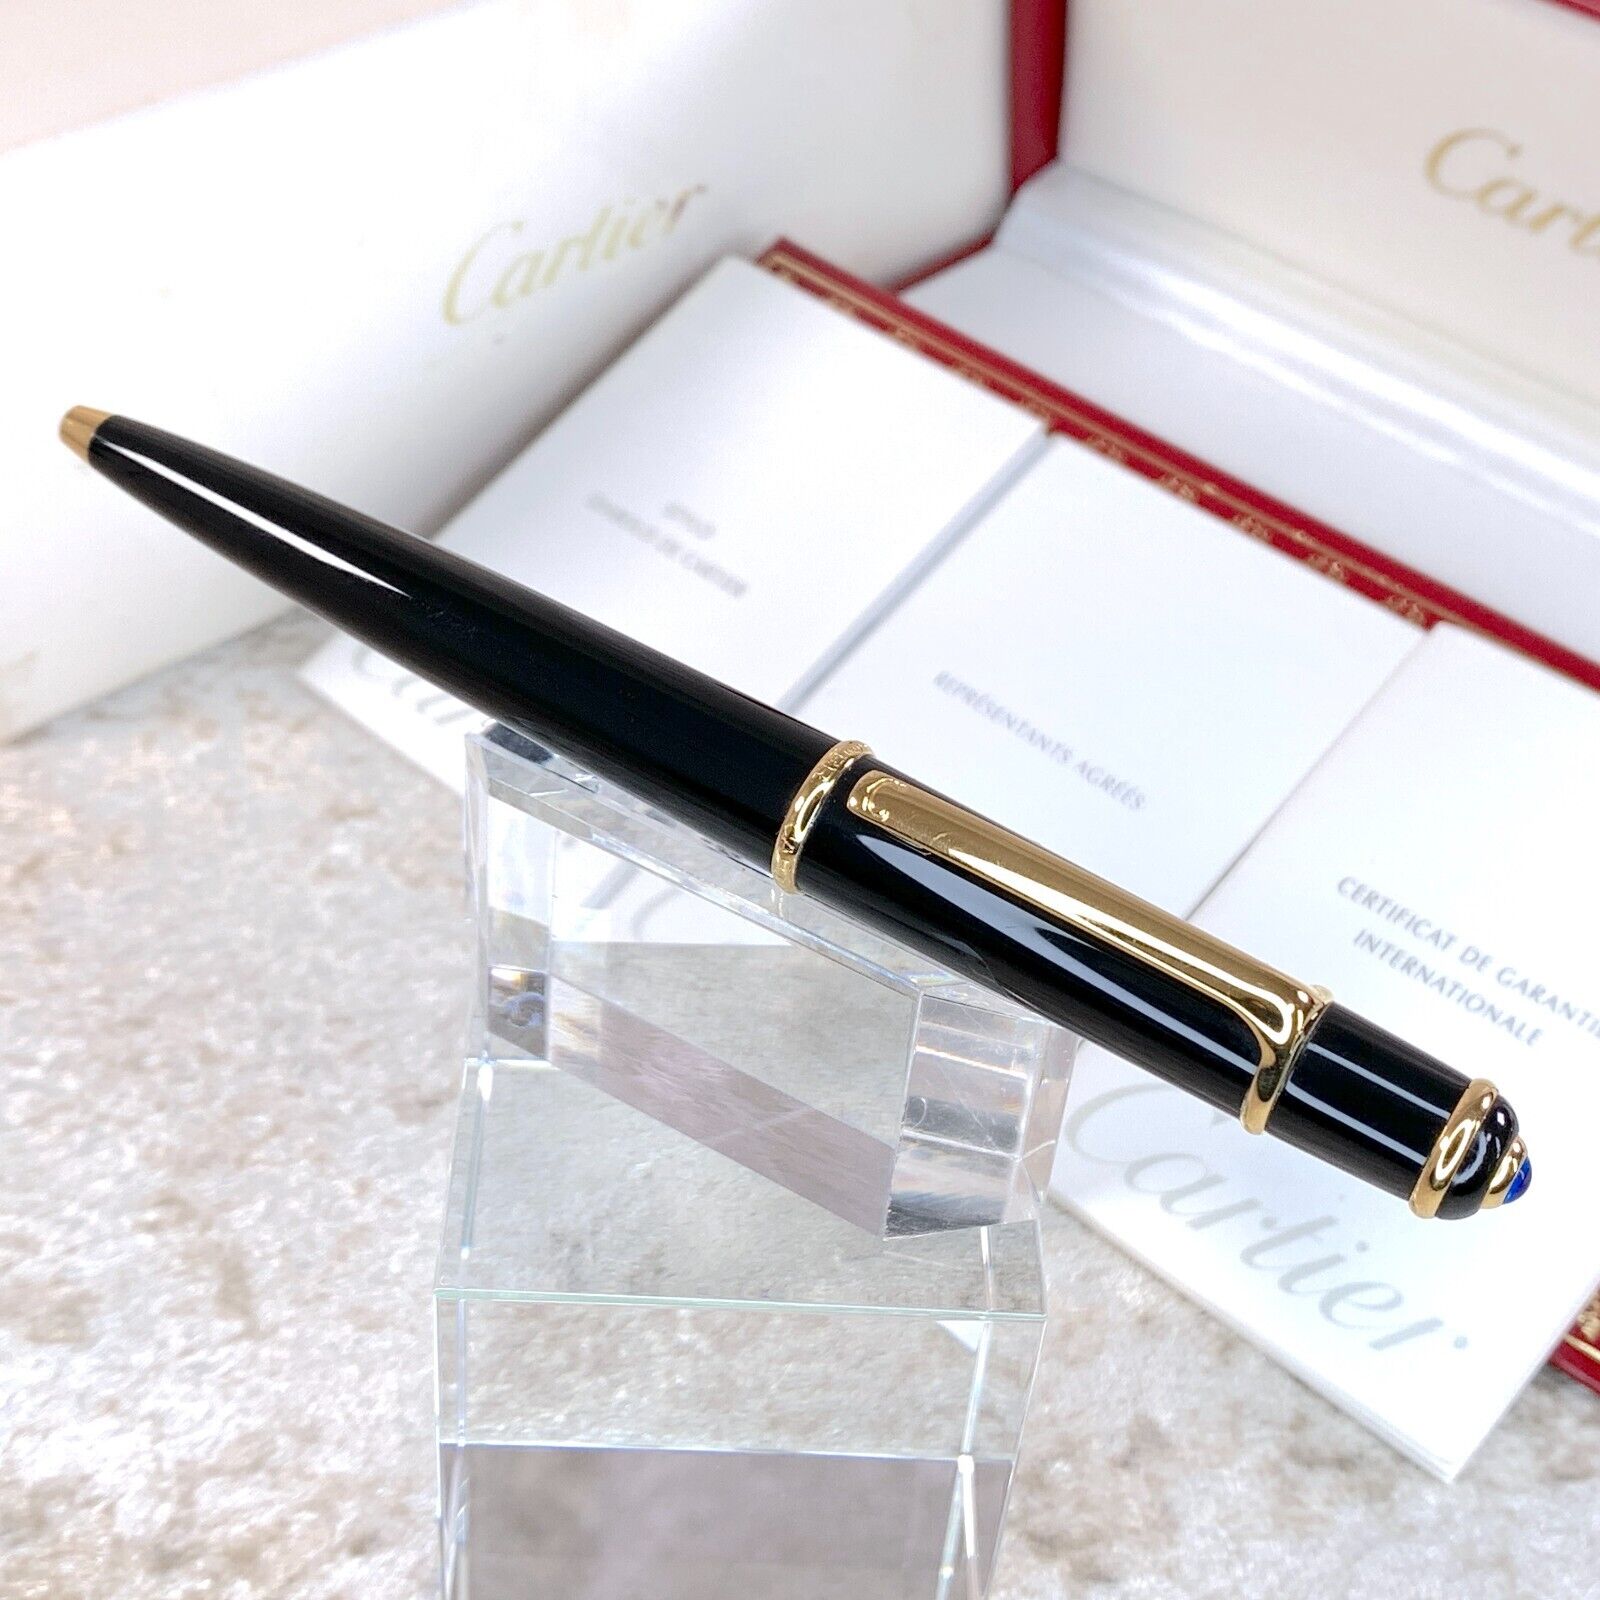 Authentic Cartier Ballpoint Pen Diabolo Black Resin Gold Finish with Box&Papers